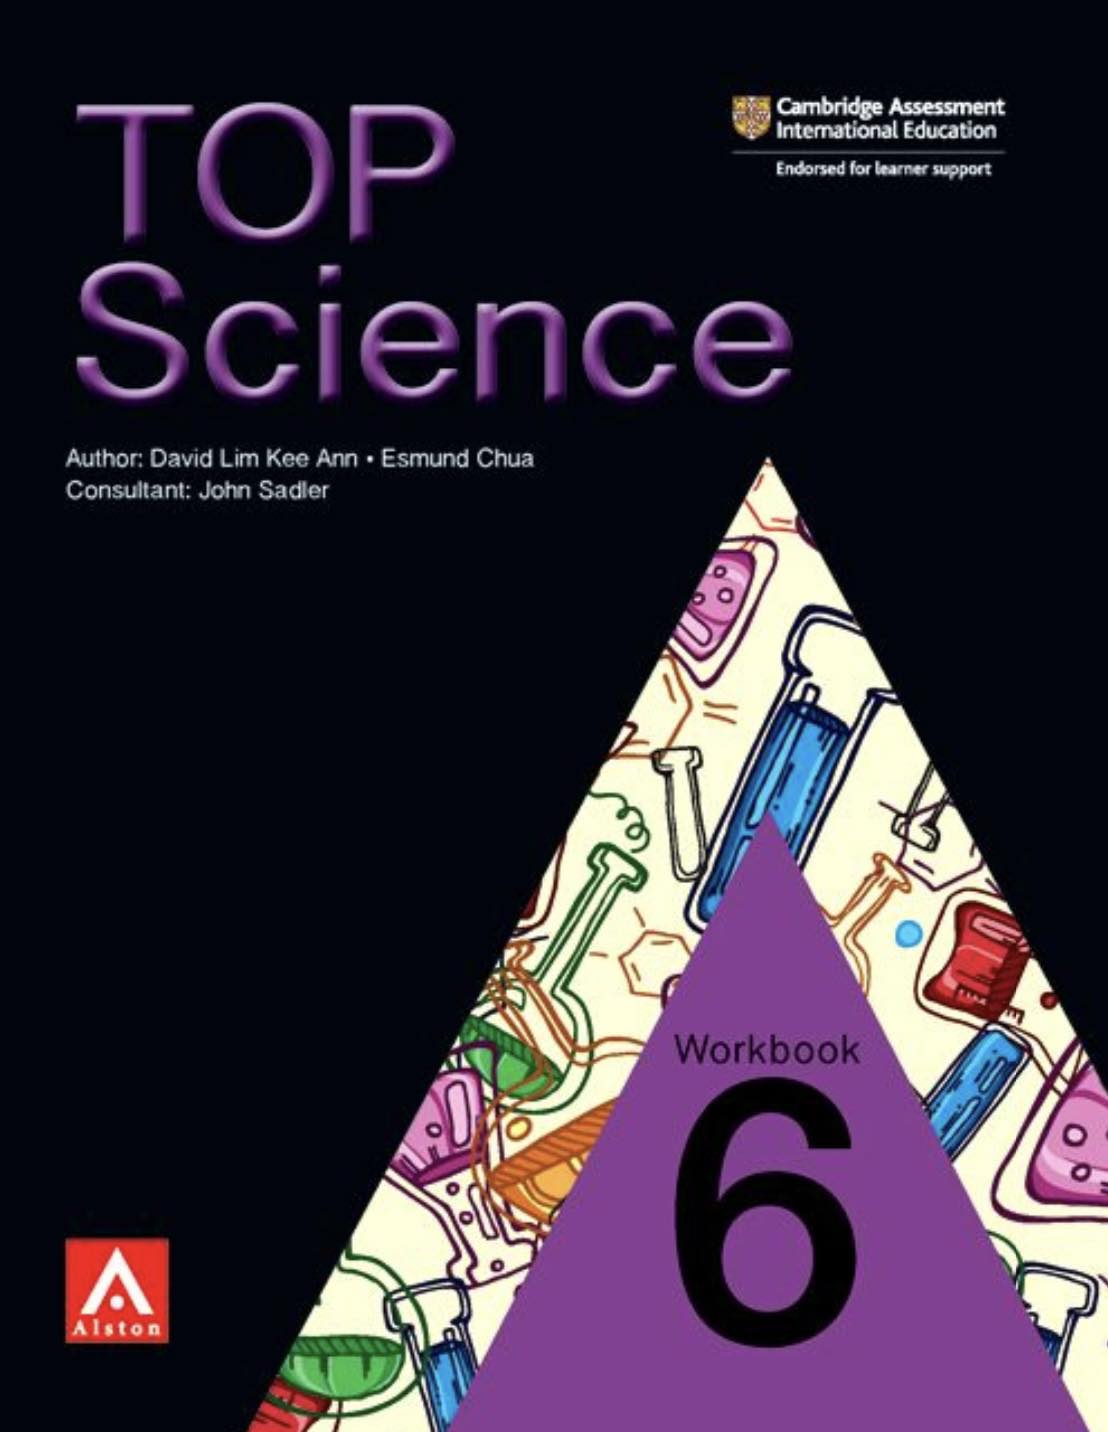 TOP Science Stage 6 Textbook and Workbook